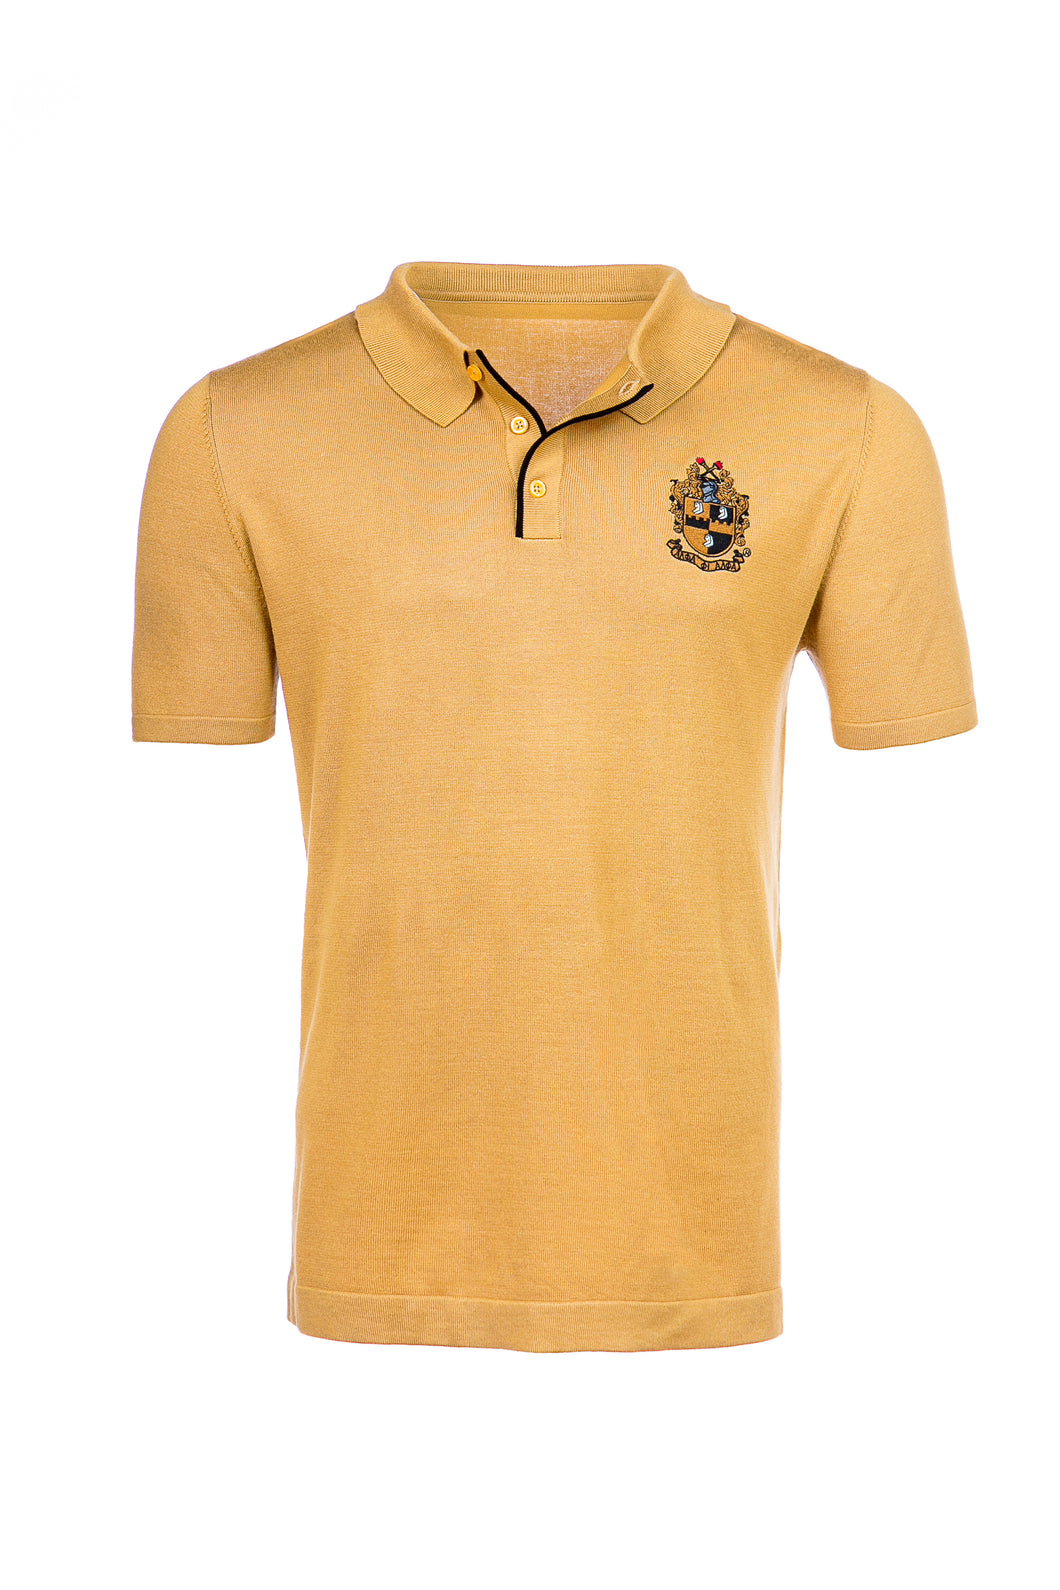 Old Gold Crest Knit Polo